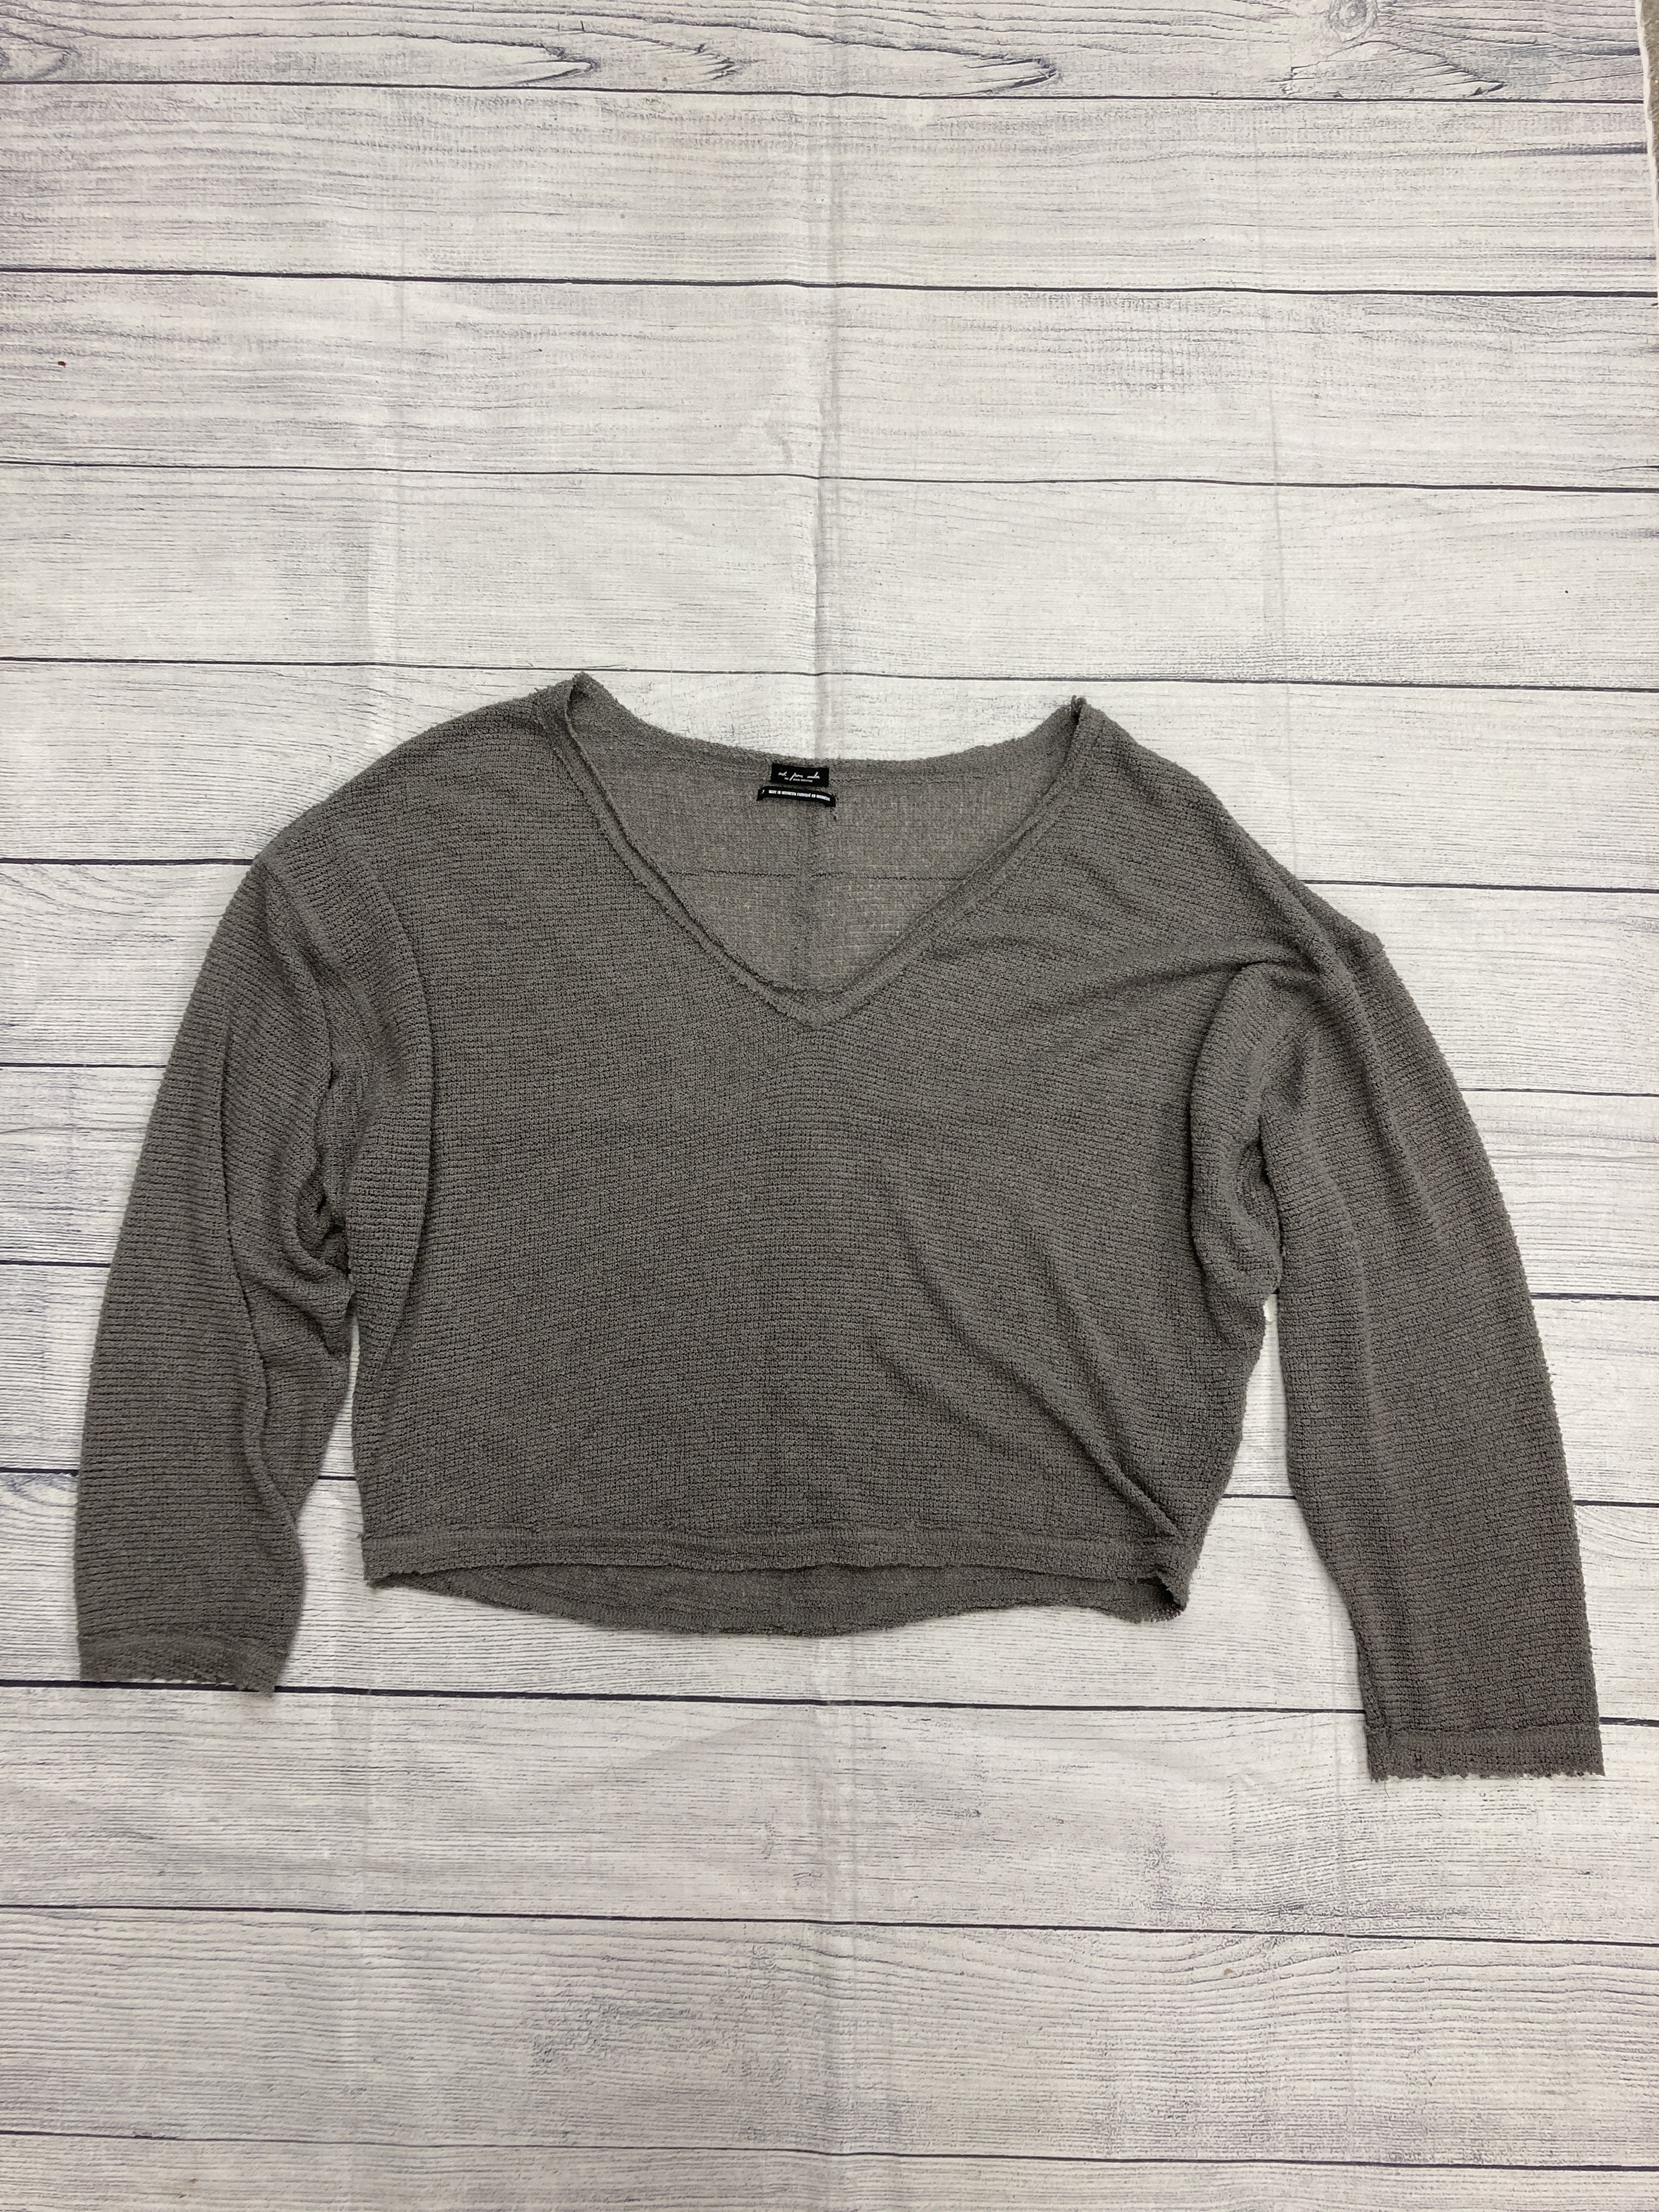 Top Long Sleeve By Urban Outfitters Size: S